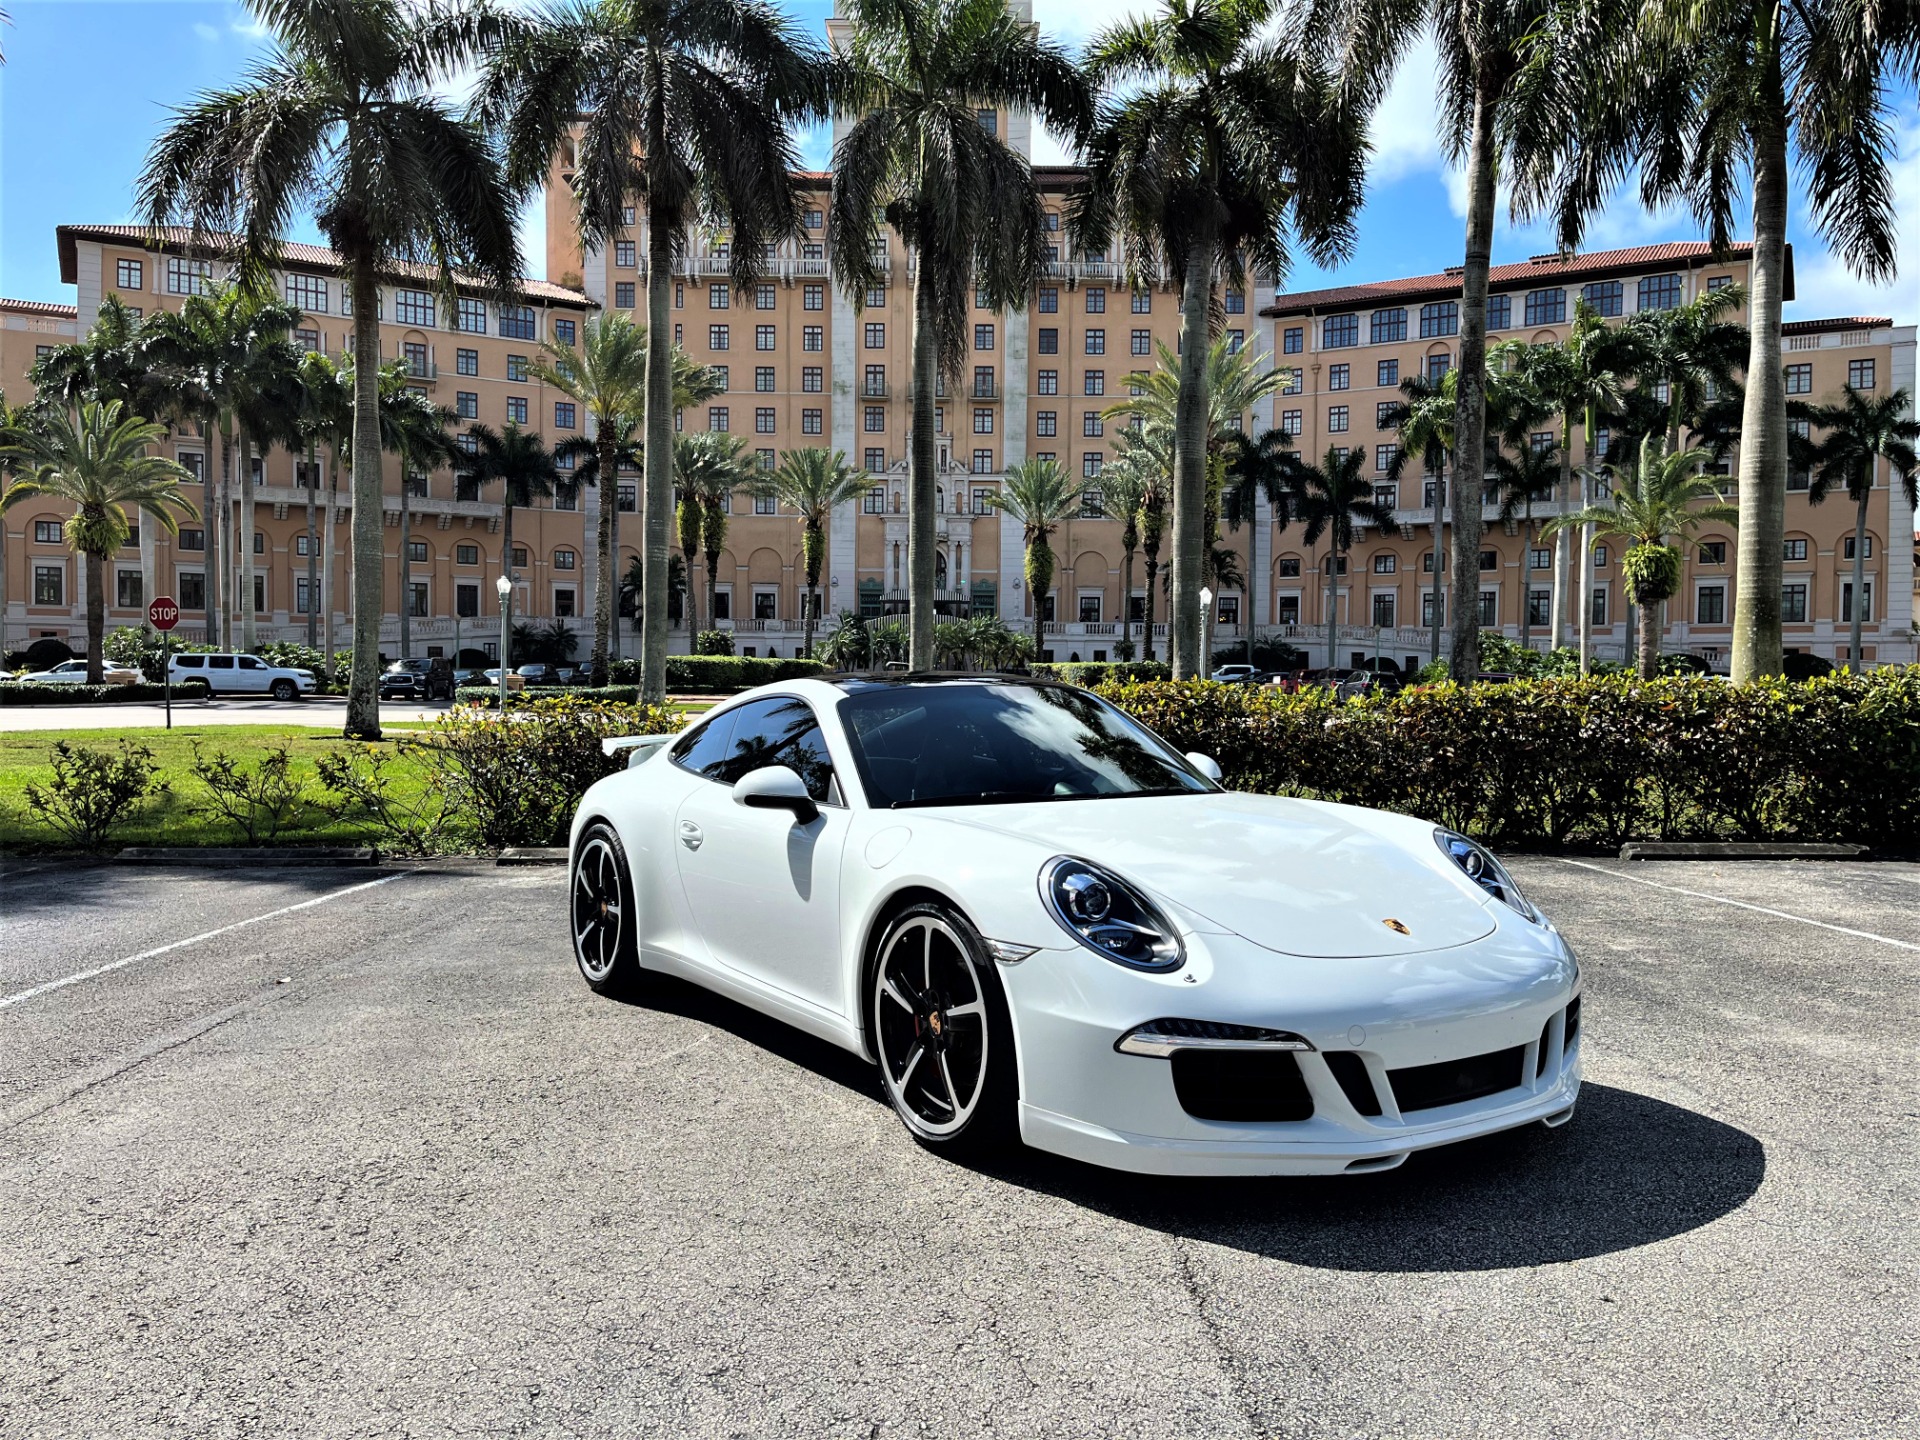 Used 2014 Porsche 911 Carrera S for sale Sold at The Gables Sports Cars in Miami FL 33146 1